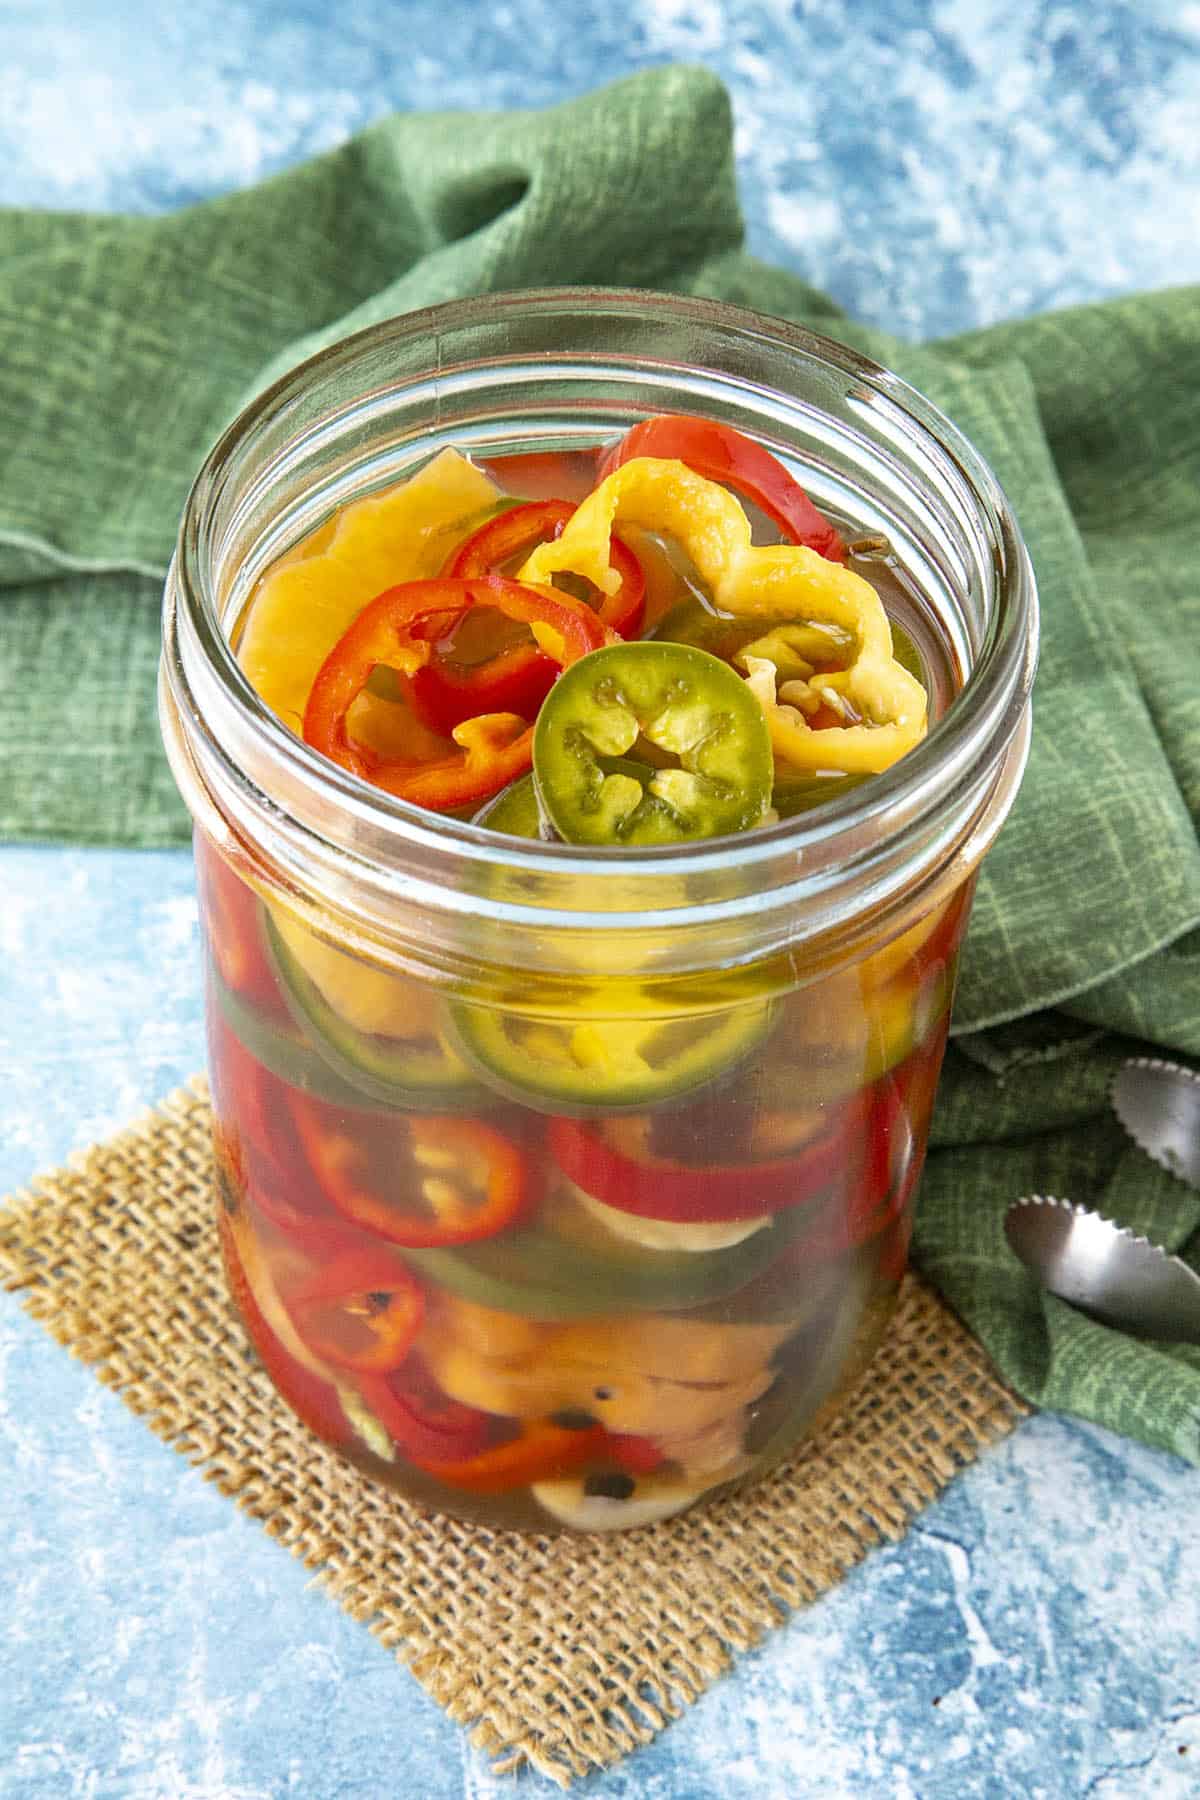 Pickled Peppers Recipe